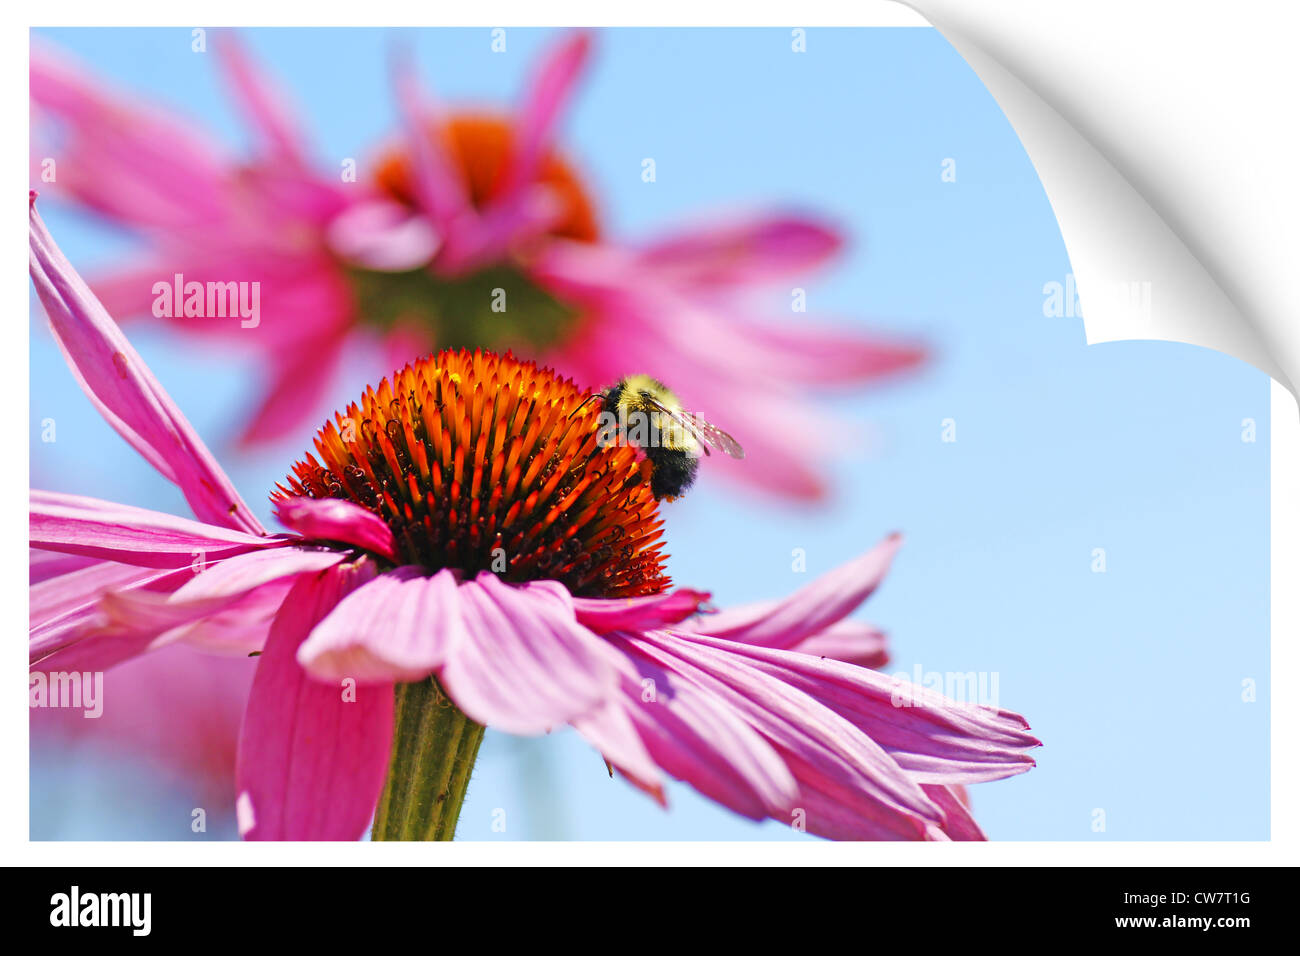 Print illusion of a bumblebee on coneflower Stock Photo